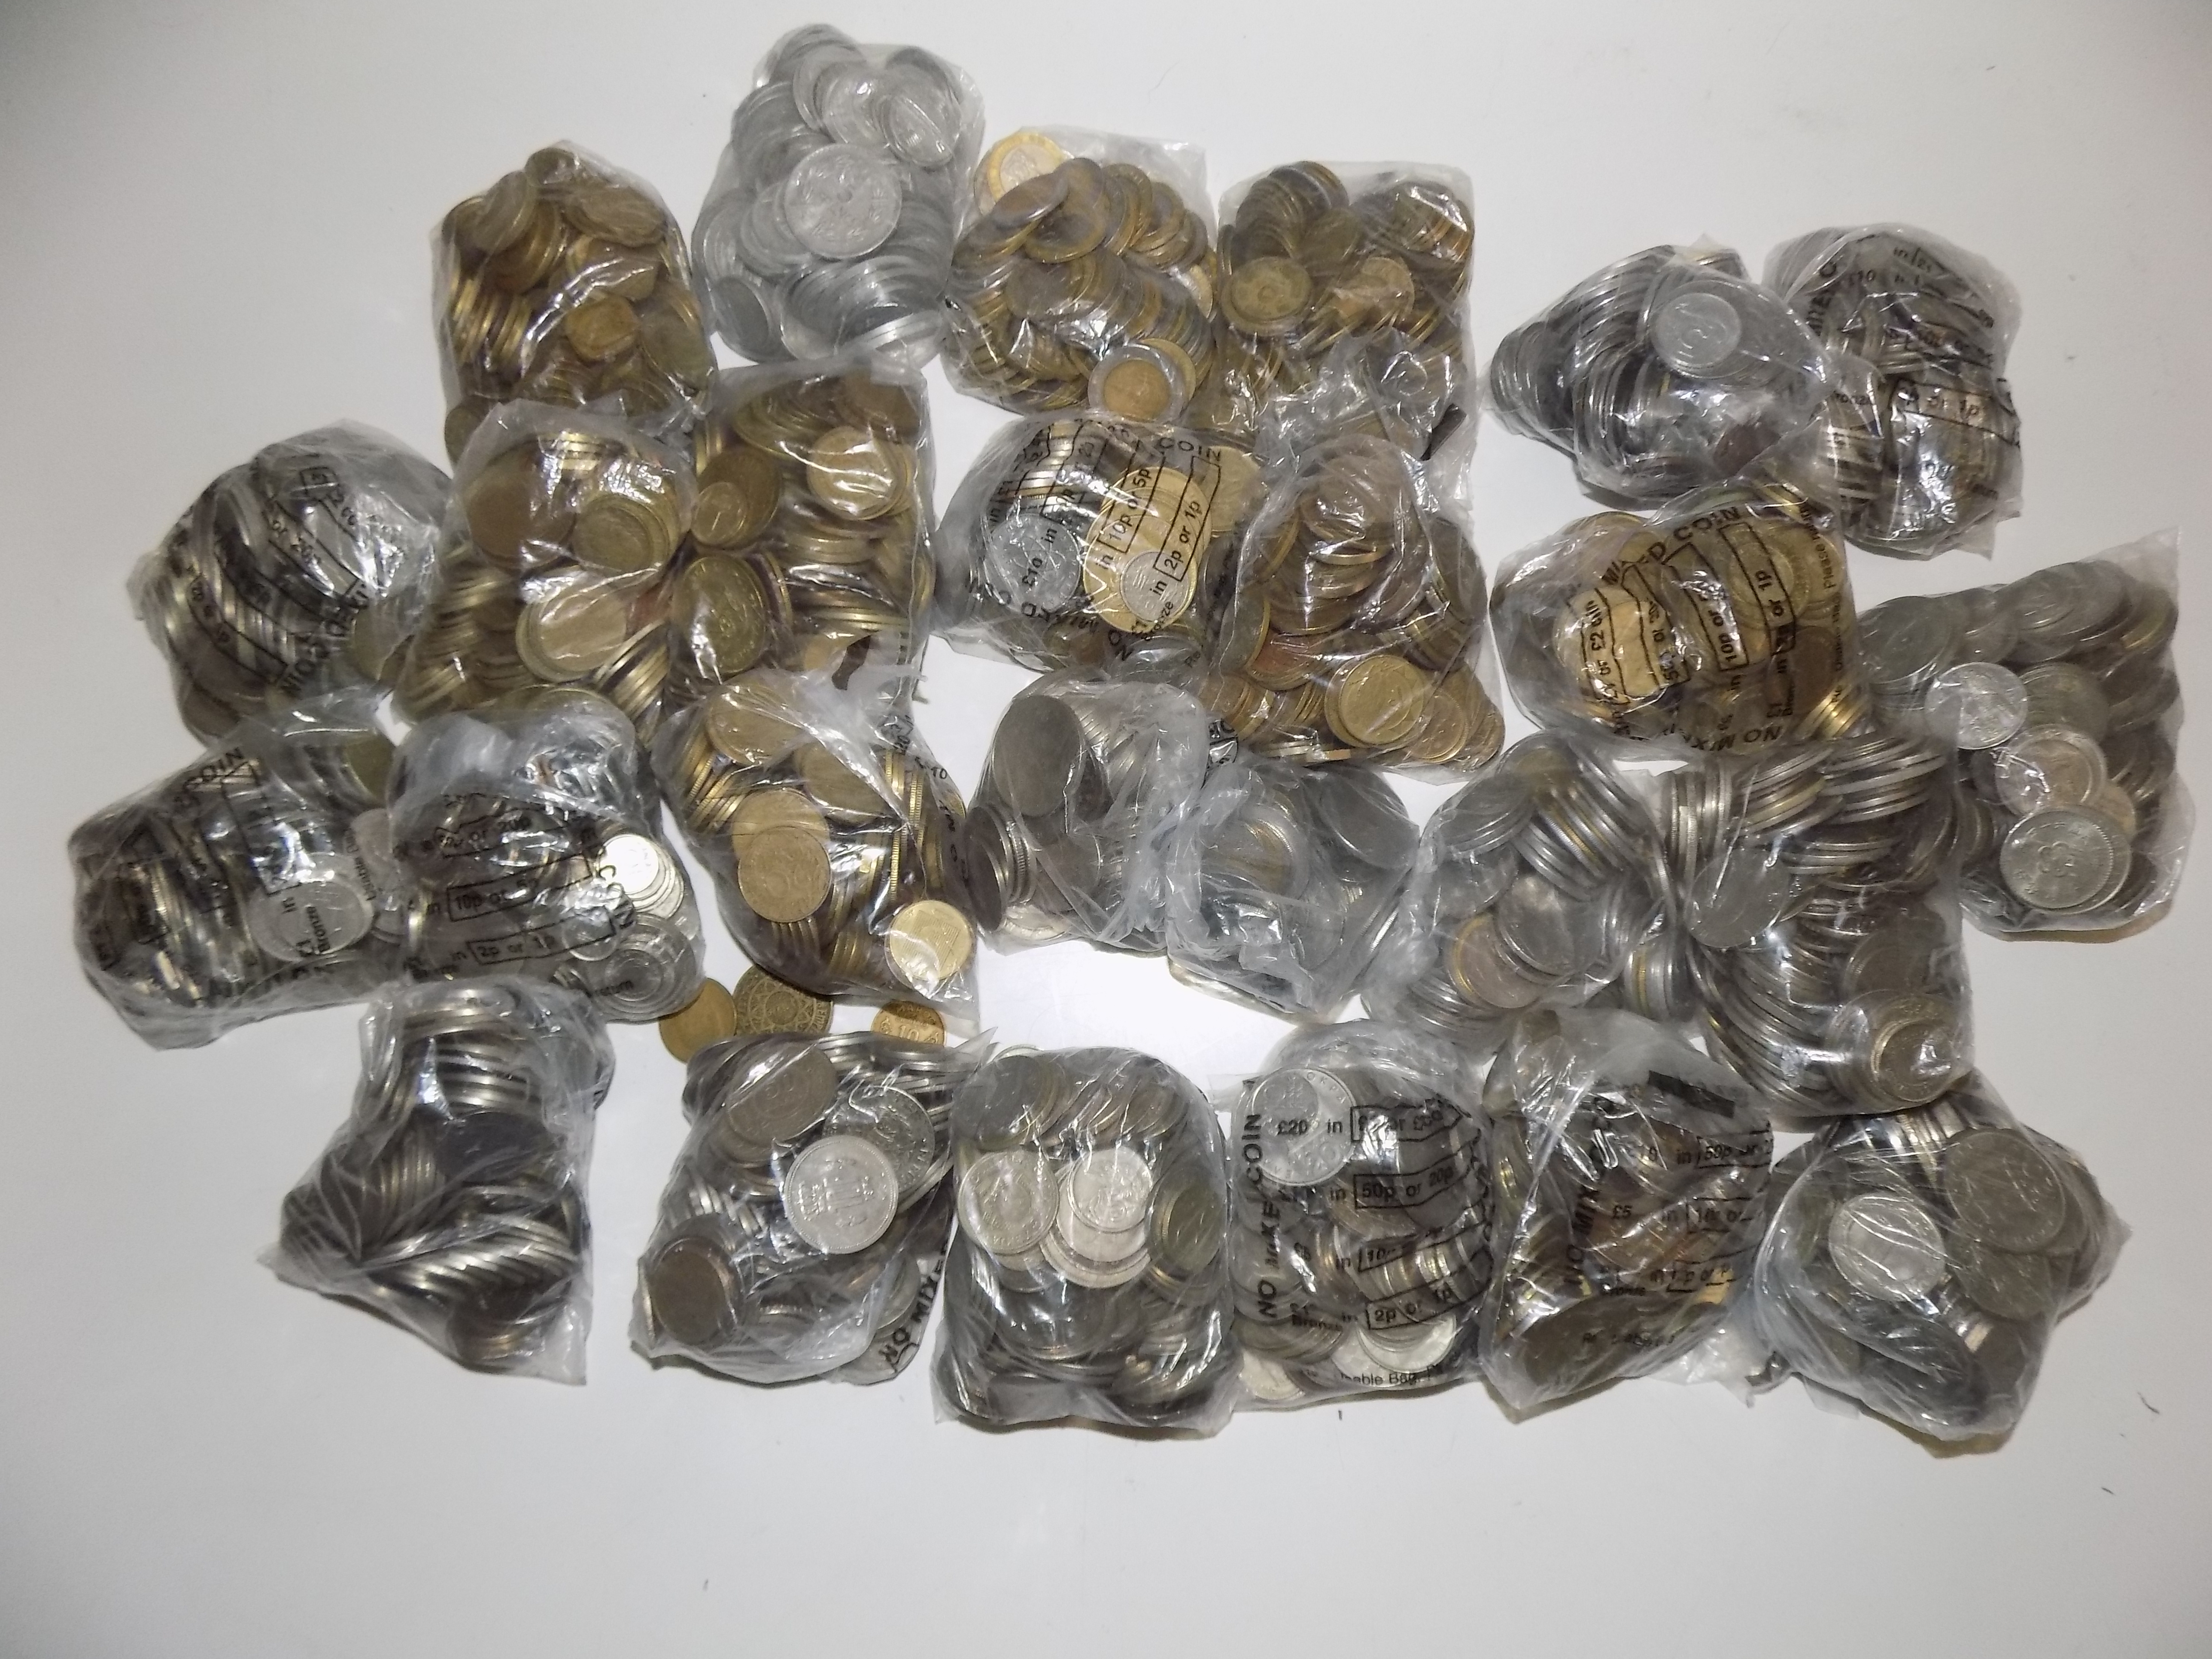 A very heavy accumulation of World coins in plastic bank bags.